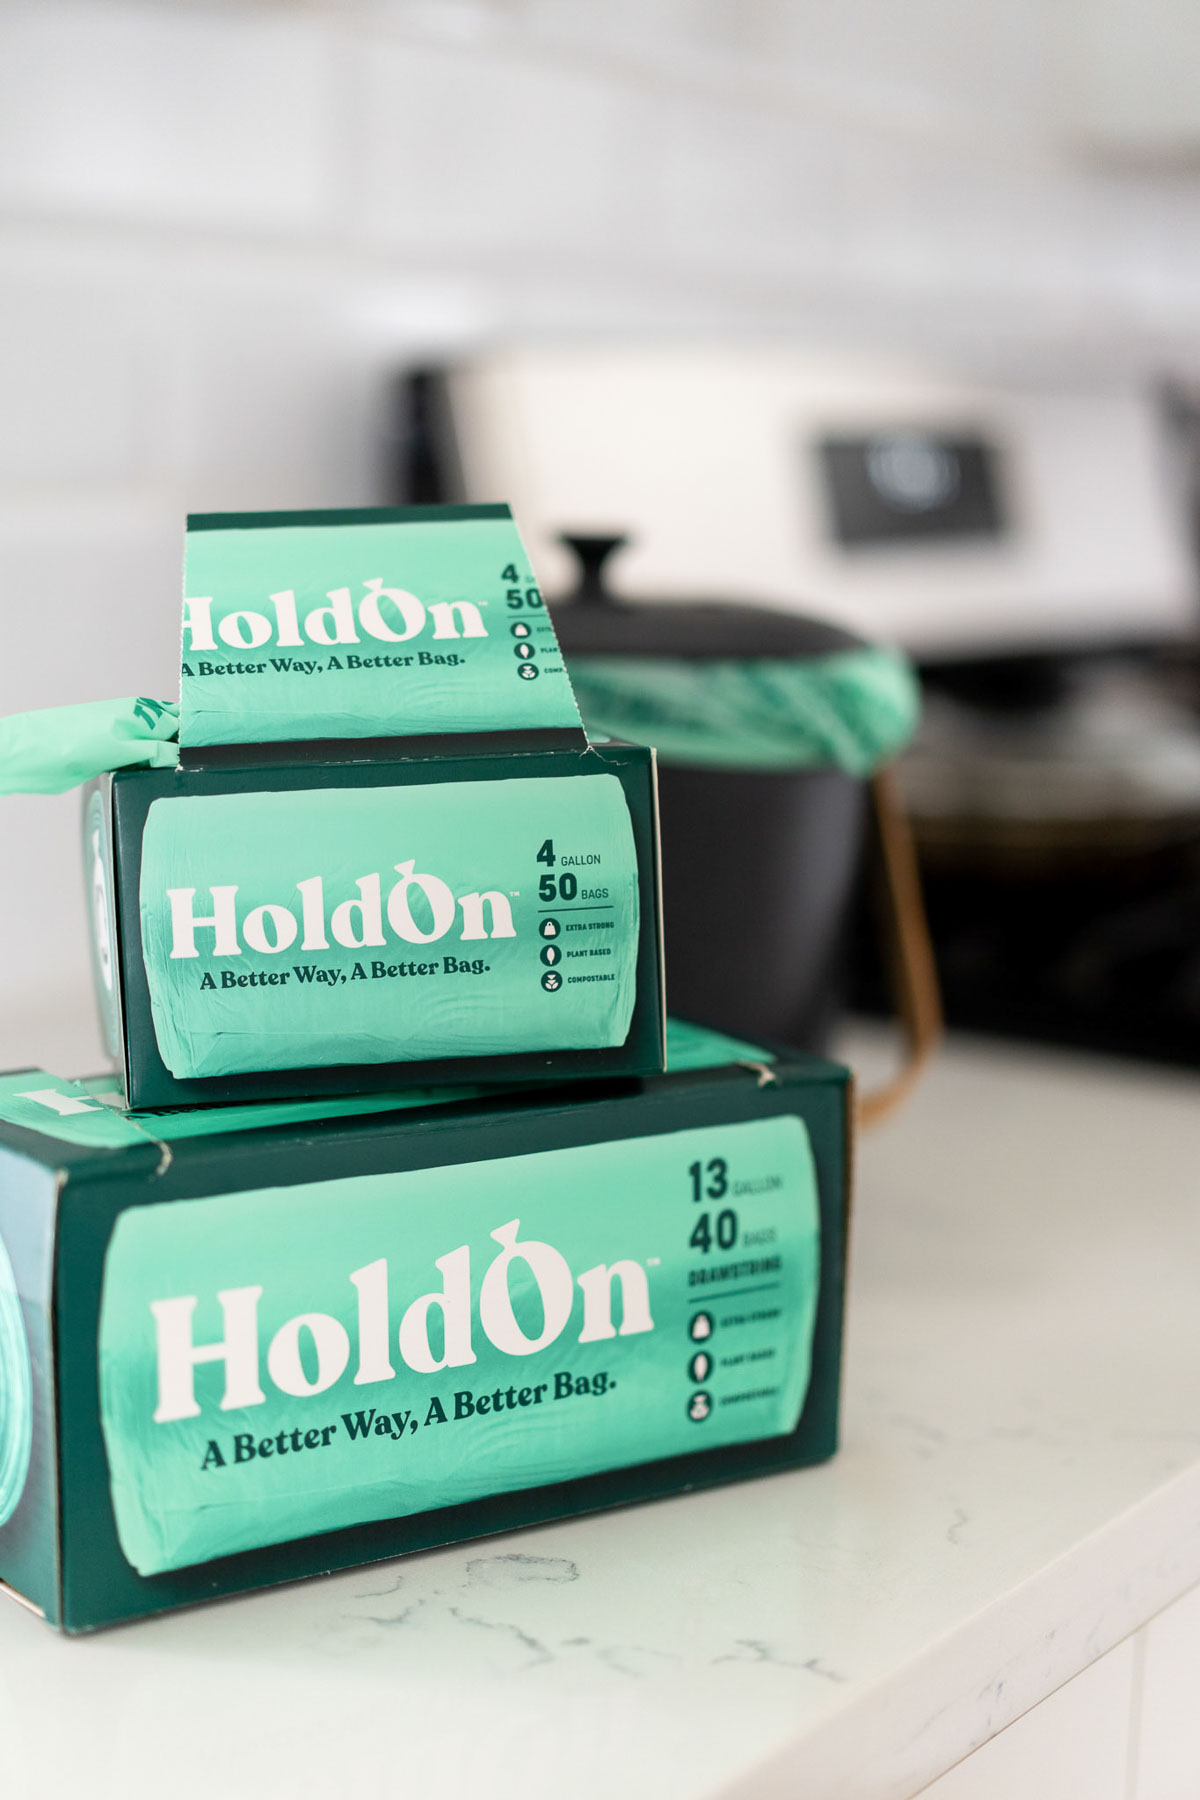 We used HoldOn's compostable trash and storage bags for a few weeks. Our  review is here. — The Reduce Report